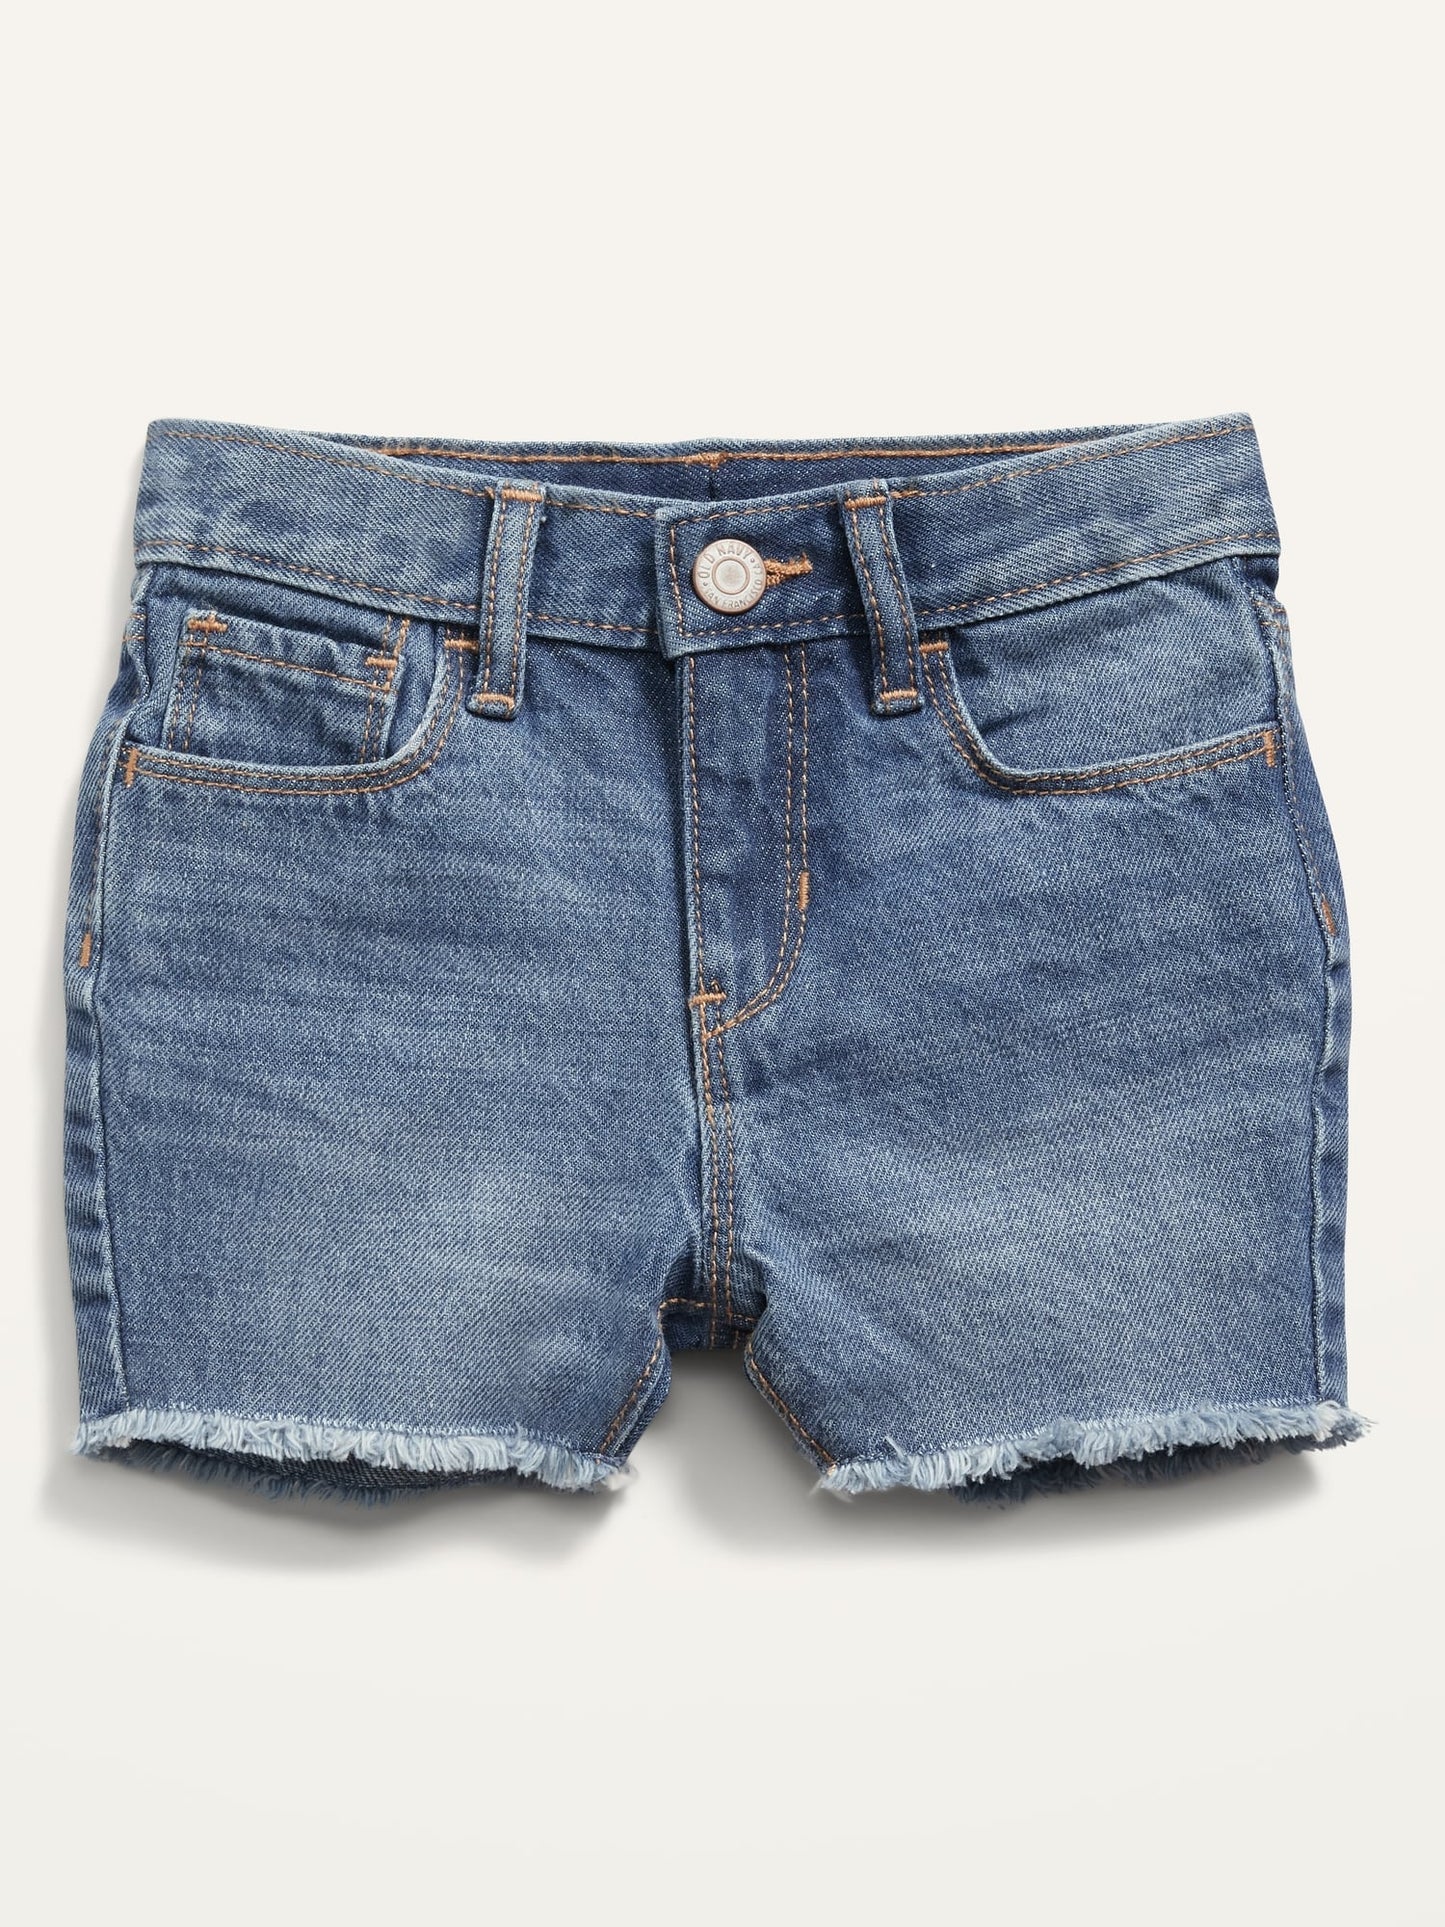 ON Unisex Slouchy Straight Cut-Off Jean Shorts For Toddler Medium Wash